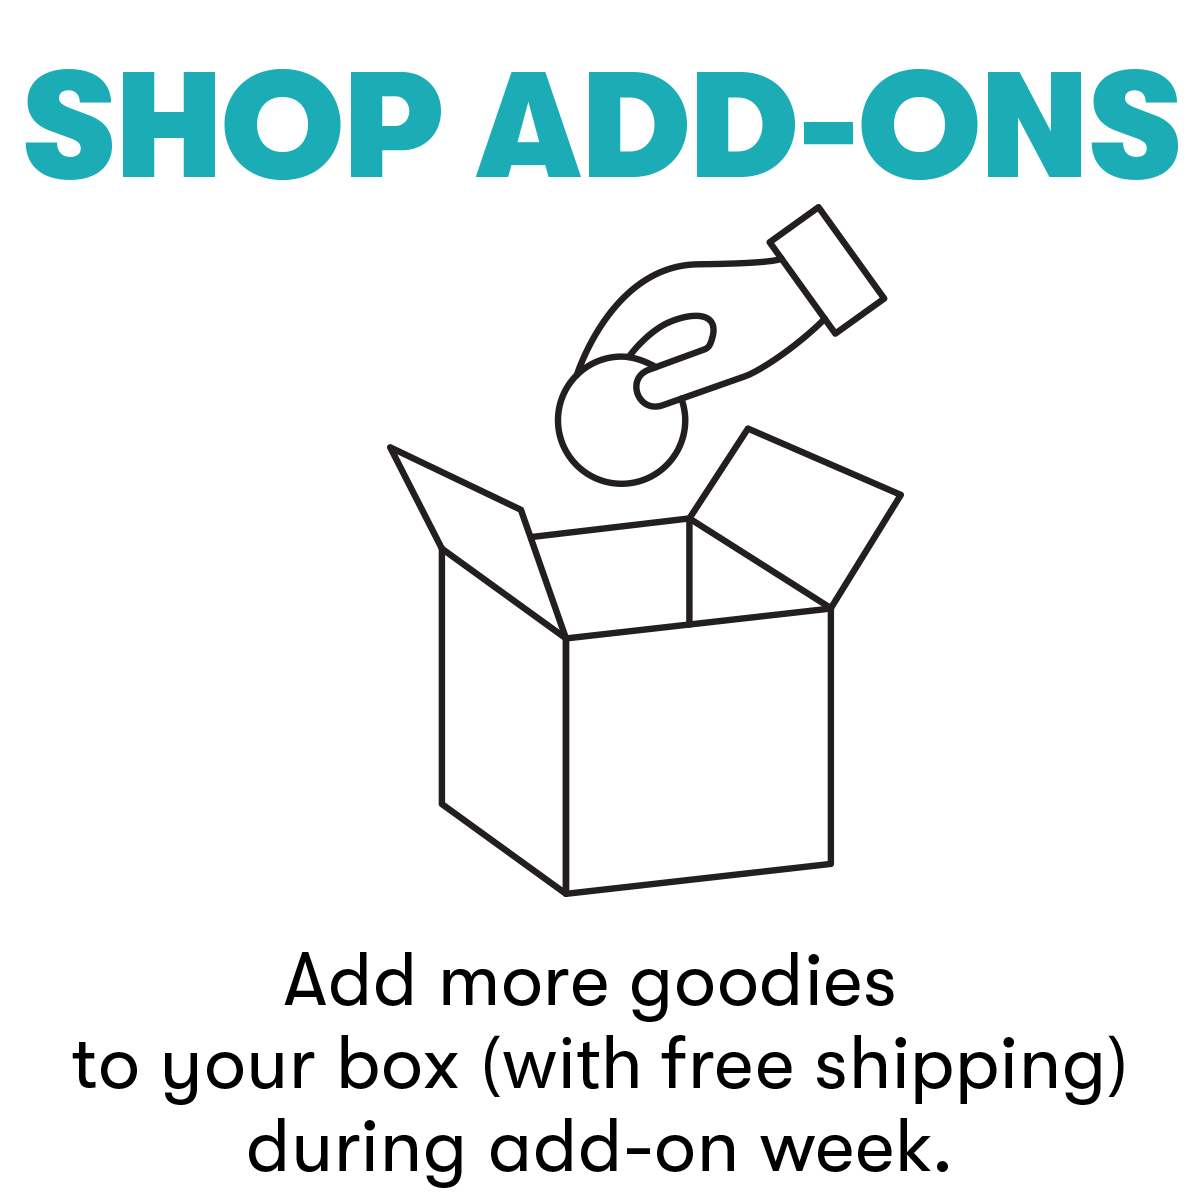 Shop Add-ons: Add more goodies to your box with free shipping during add-on week.